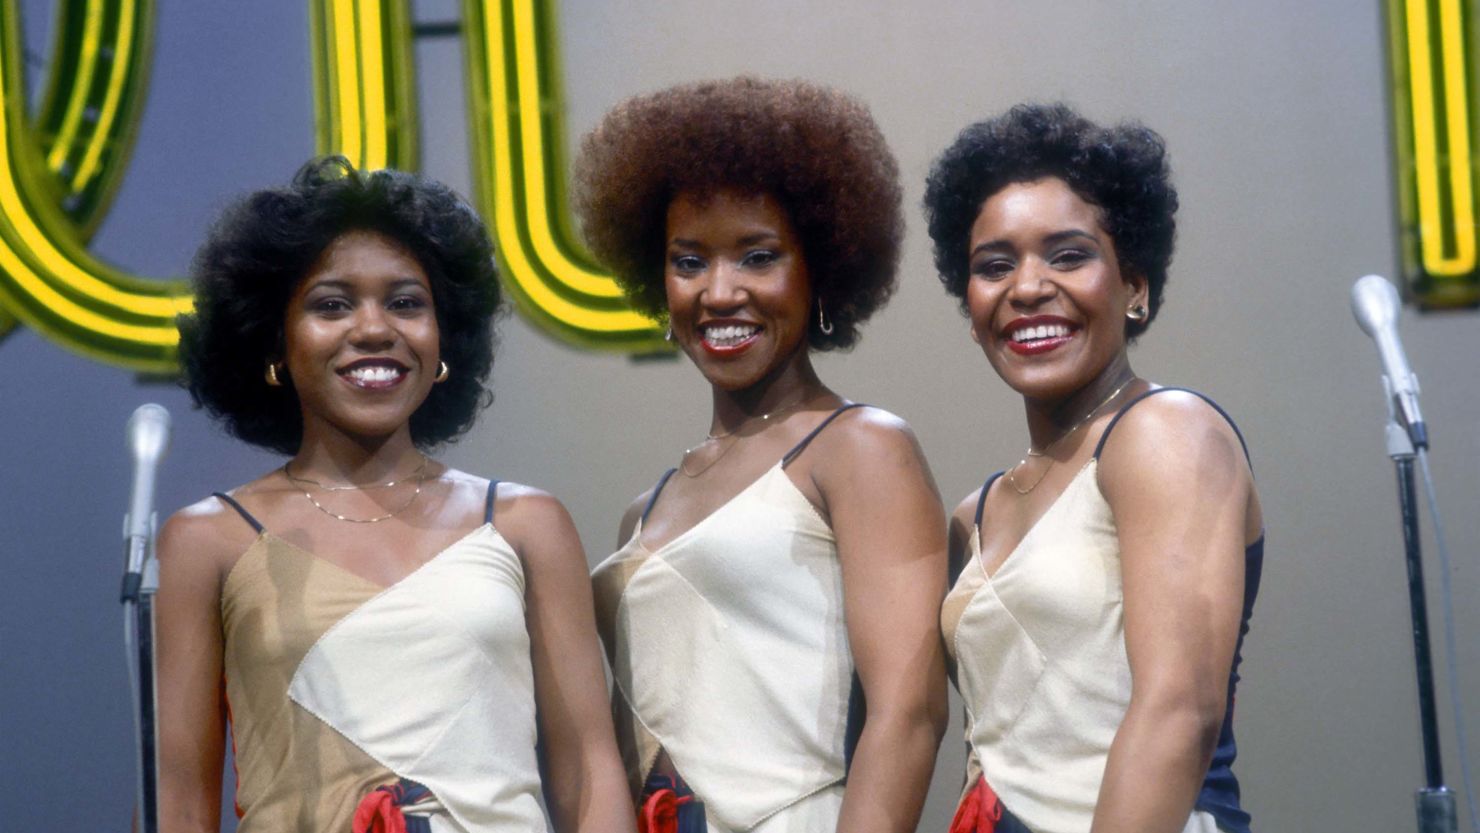 The Emotions (L-R Pamela Hutchinson, Wanda Hutchinson and Sheila Hutchinson) pose on the set of the TV show "Soul Train" in August 1977 in Los Angeles 